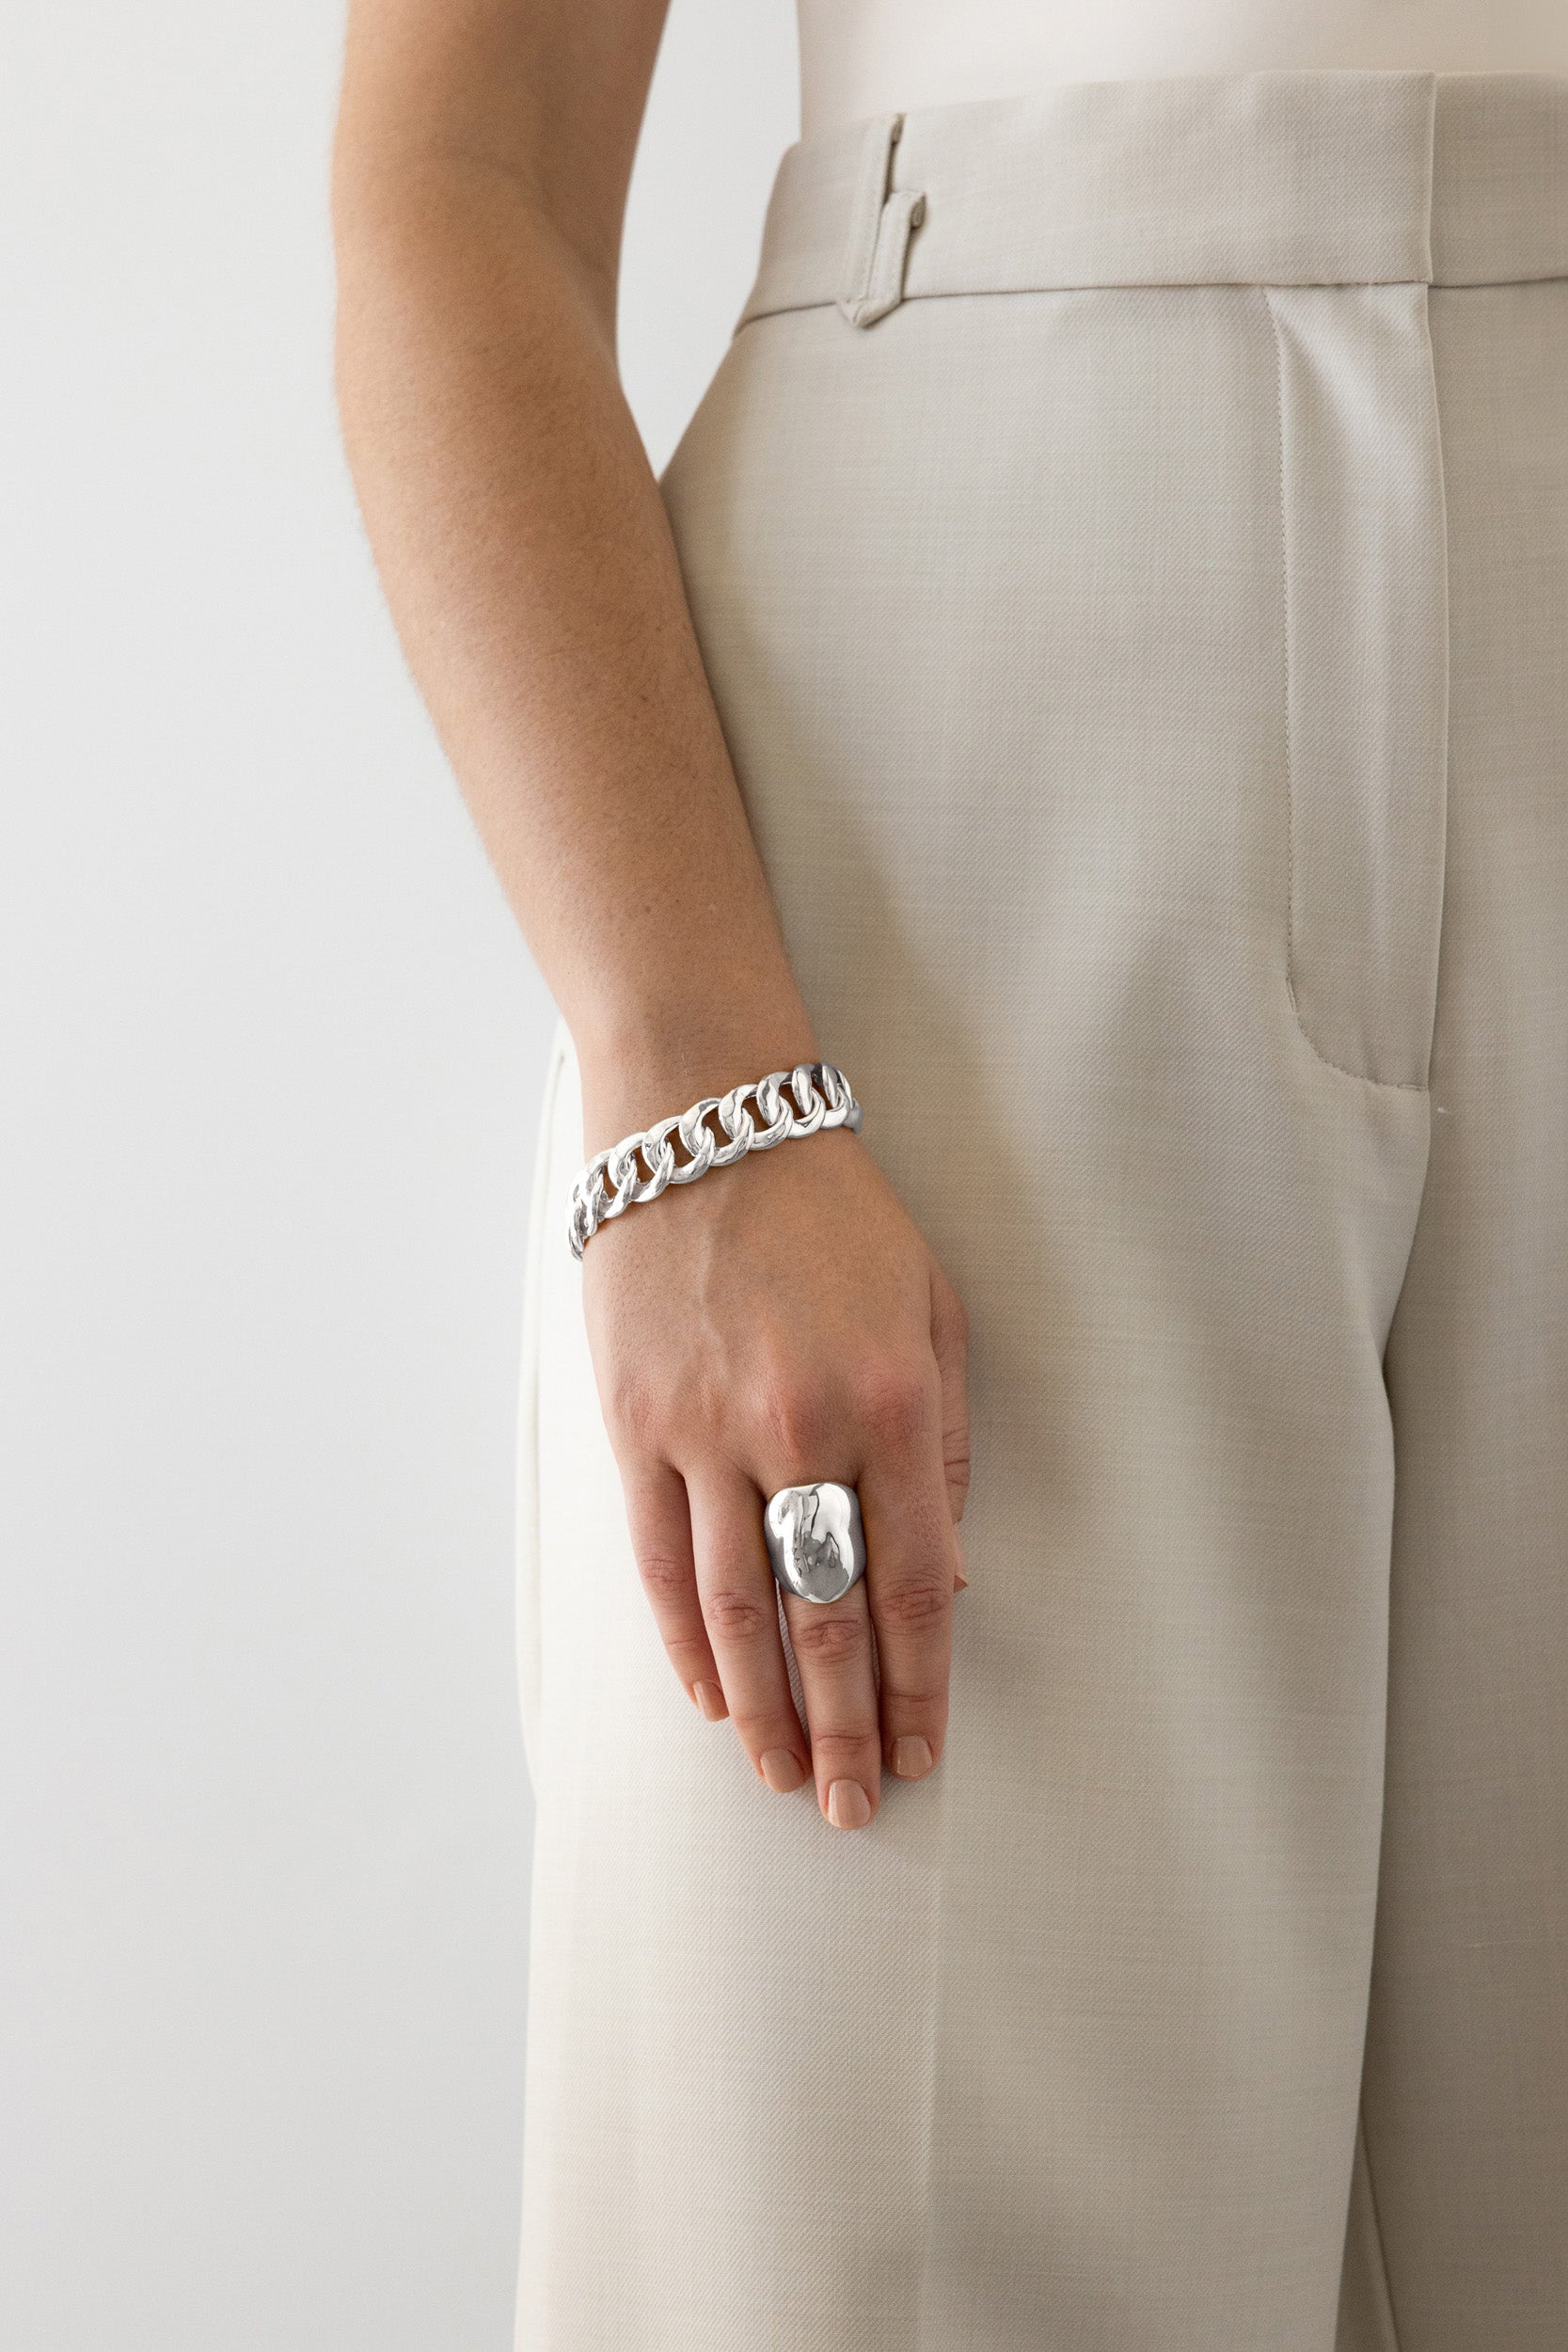 Flash Jewellery Dylan Dome Ring in Sterling Silver on model